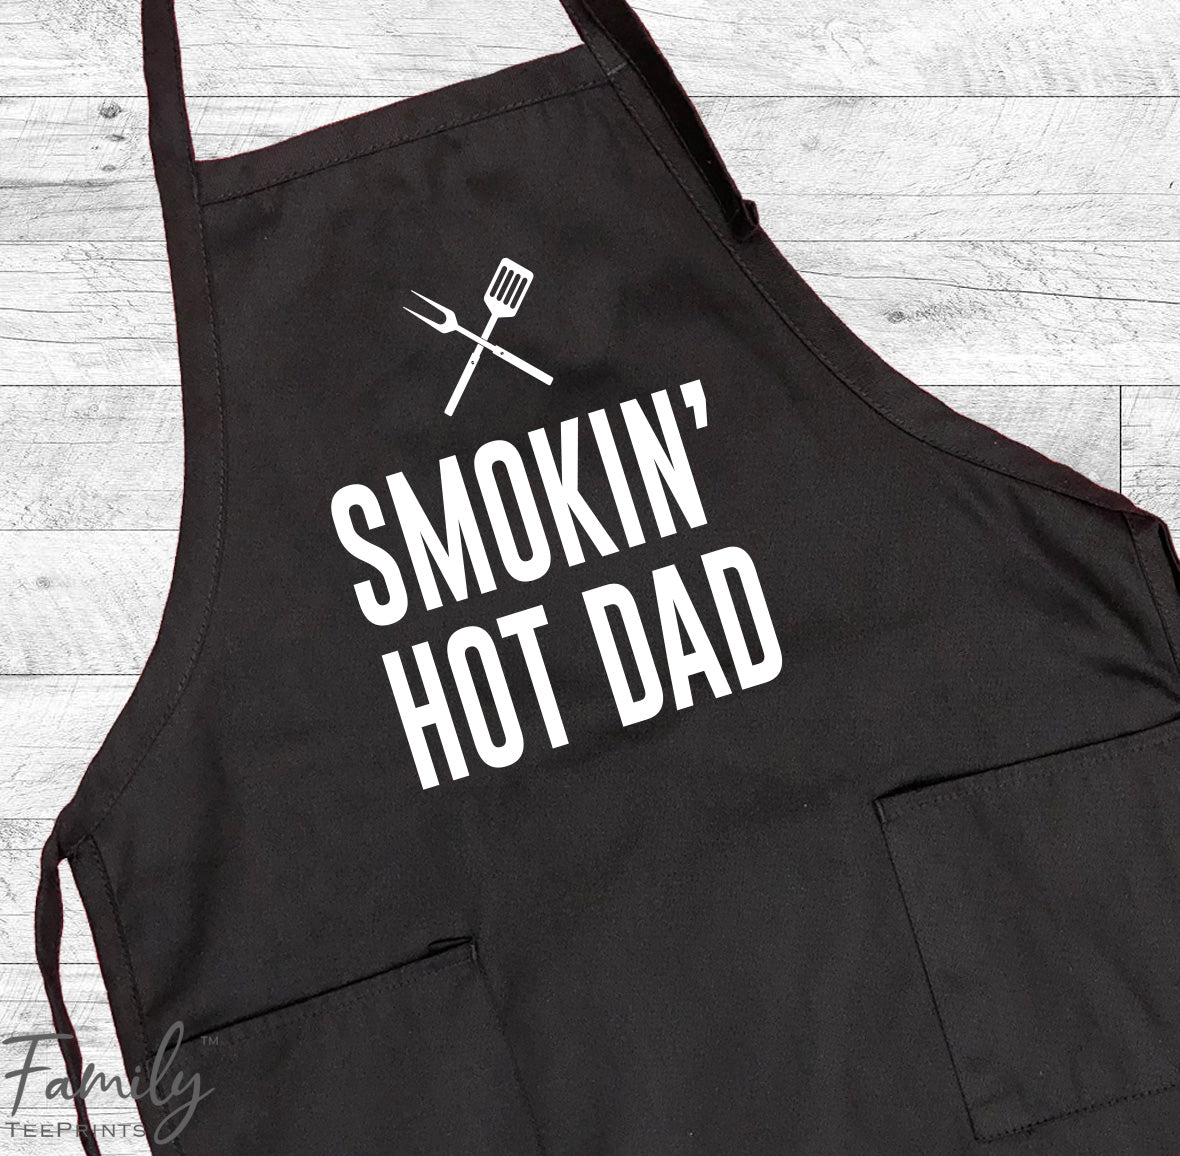 DYJYBMY I Only Smoke The Good Stuff Funny BBQ Apron for Men Women,Black Adjustable Waterproof Cooking Grilling Apron Gift for Dad Mom Husband Wife